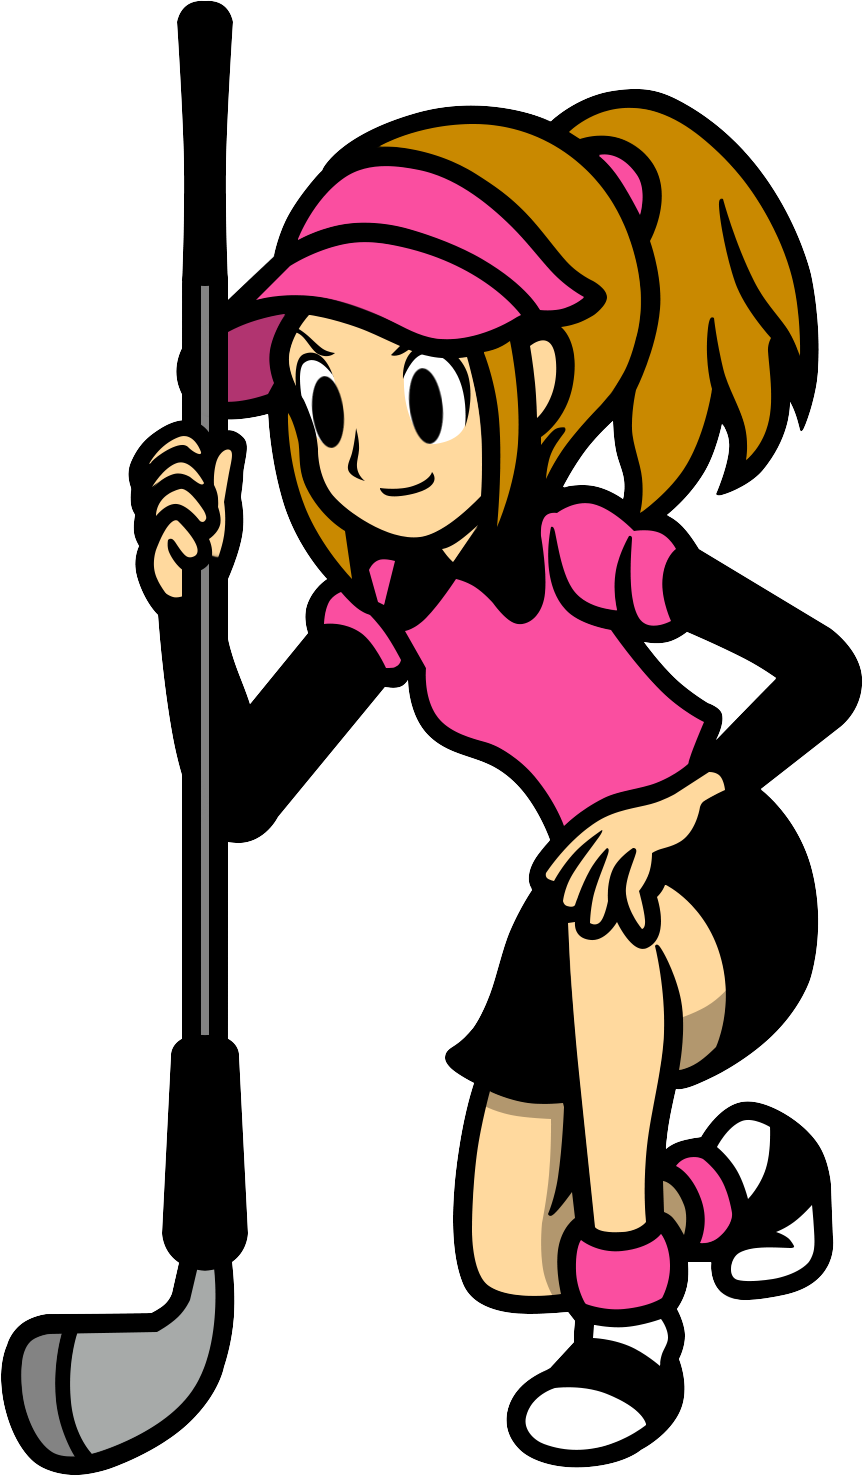  golf clip art. Golfing clipart hole in one